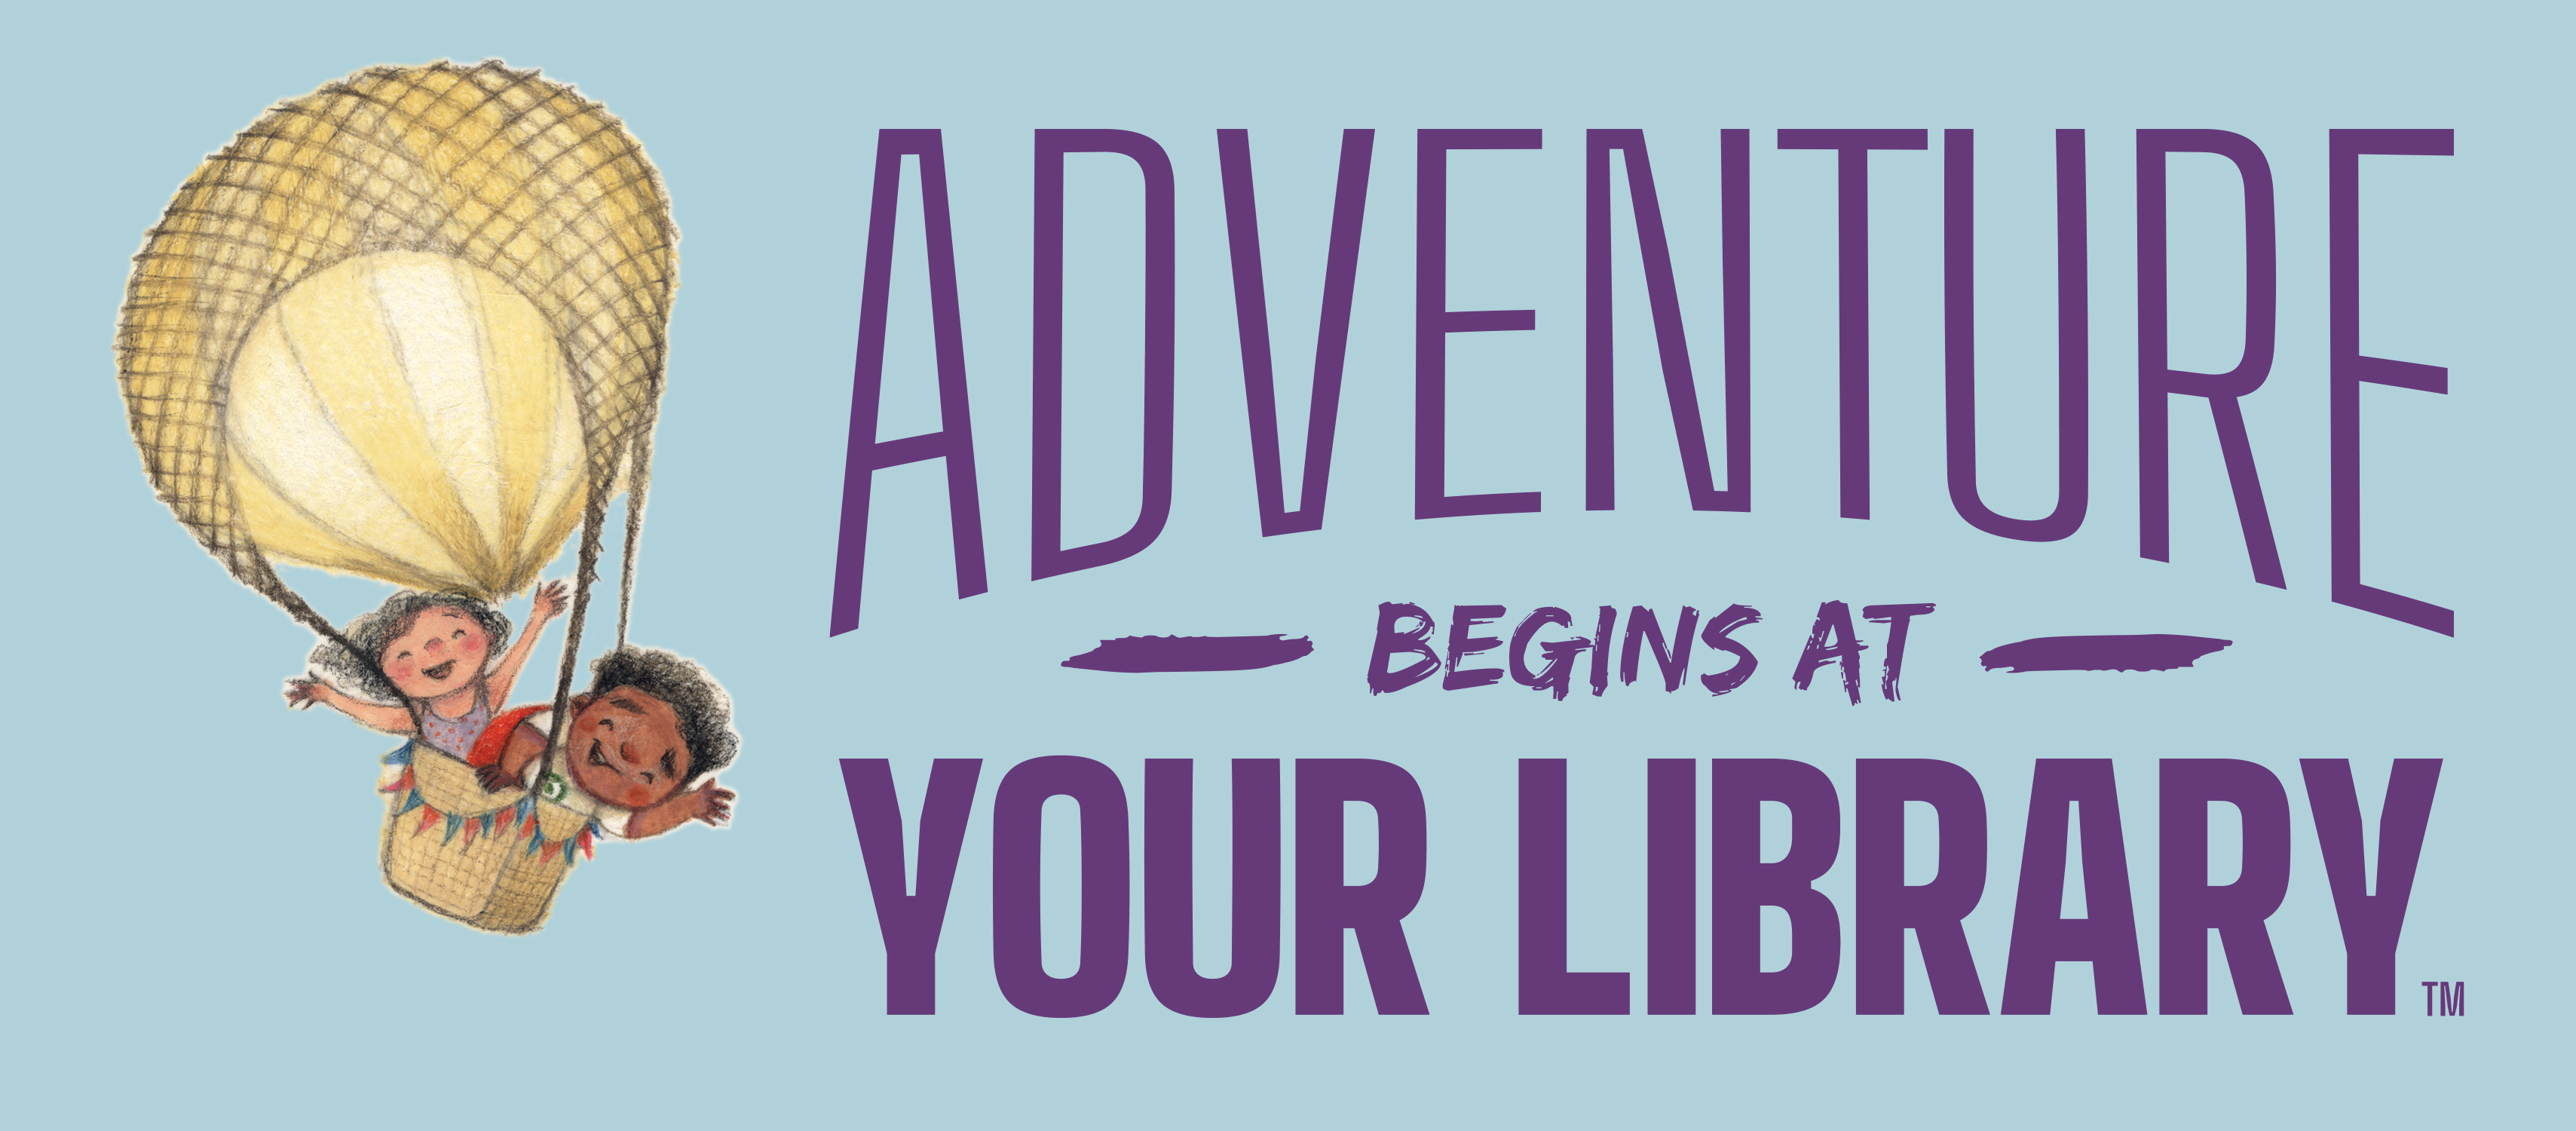 two children in a hot air balloon with text- Adventure begins at your library